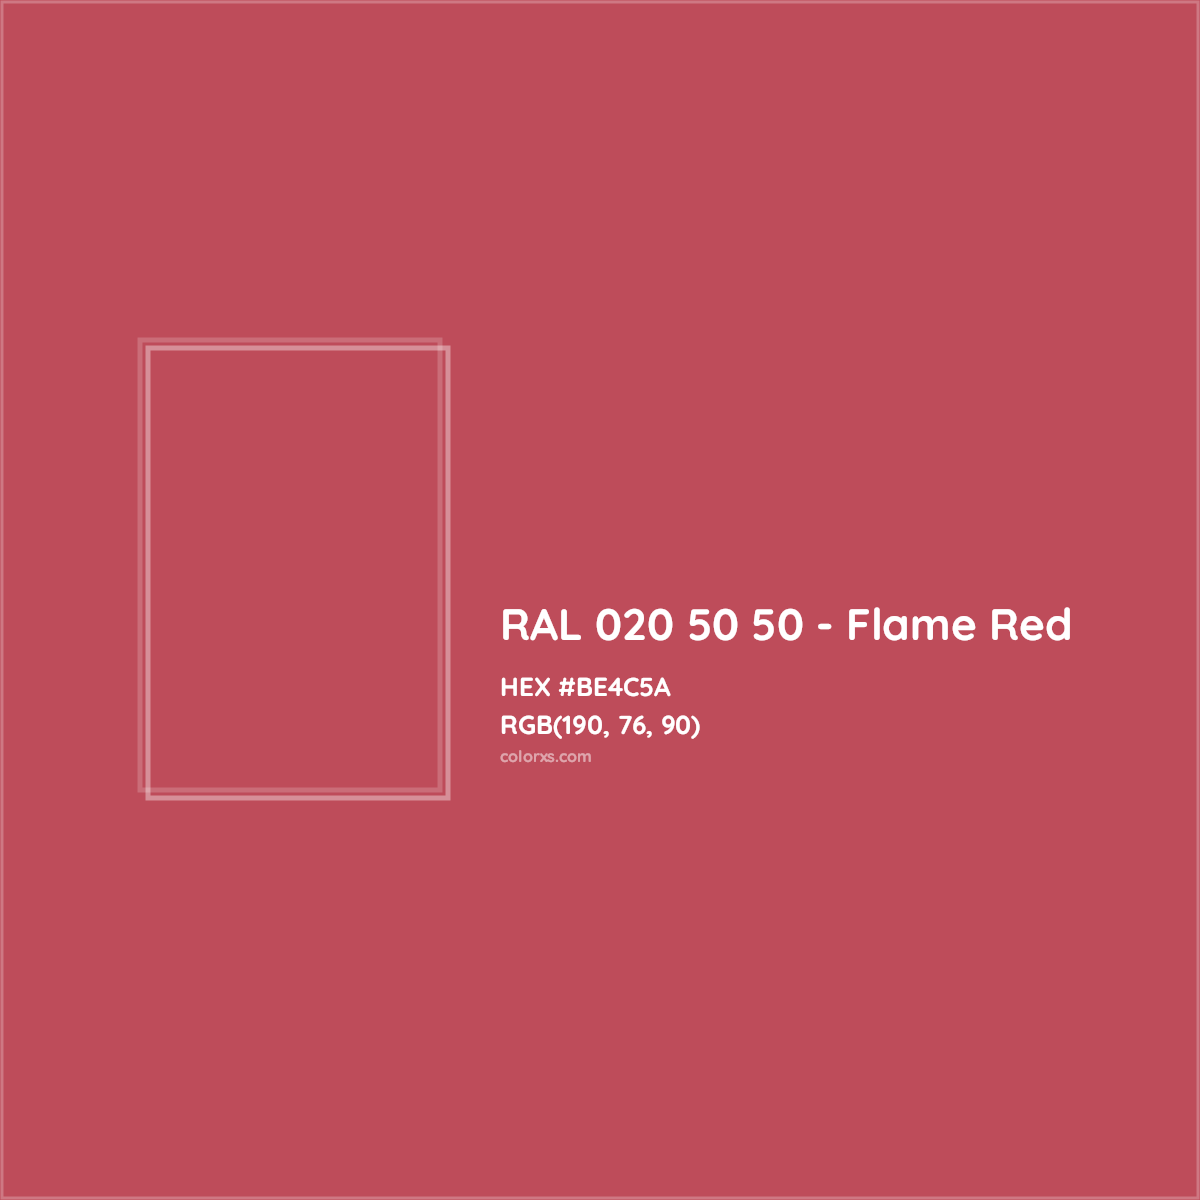 HEX #BE4C5A RAL 020 50 50 - Flame Red CMS RAL Design - Color Code